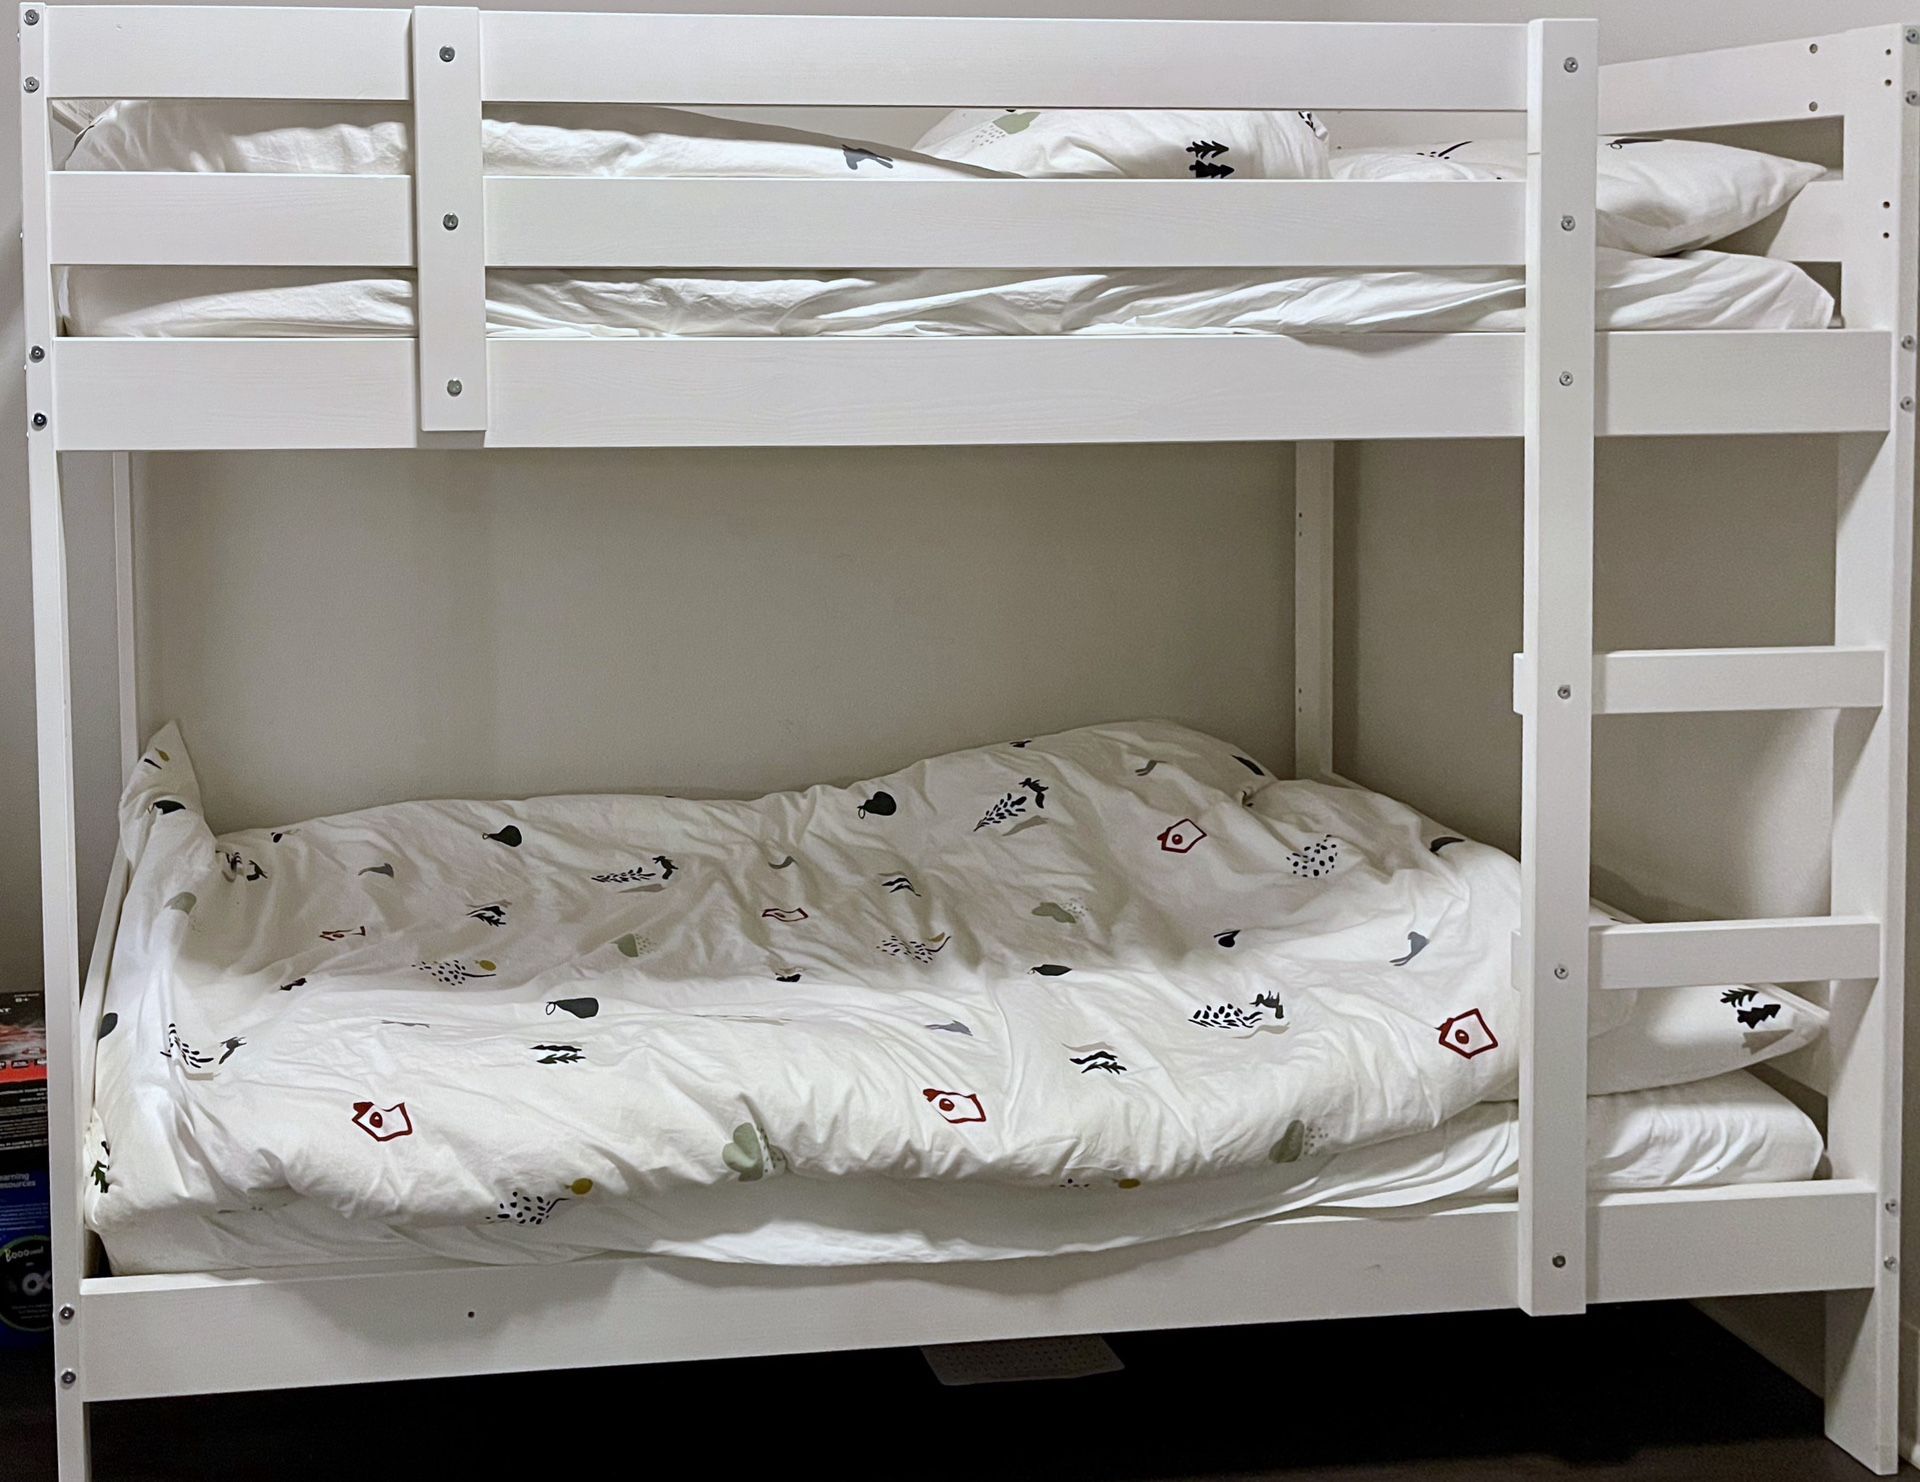 IKEA MYDAL Bunk Bed Frame with Twin Mattresses